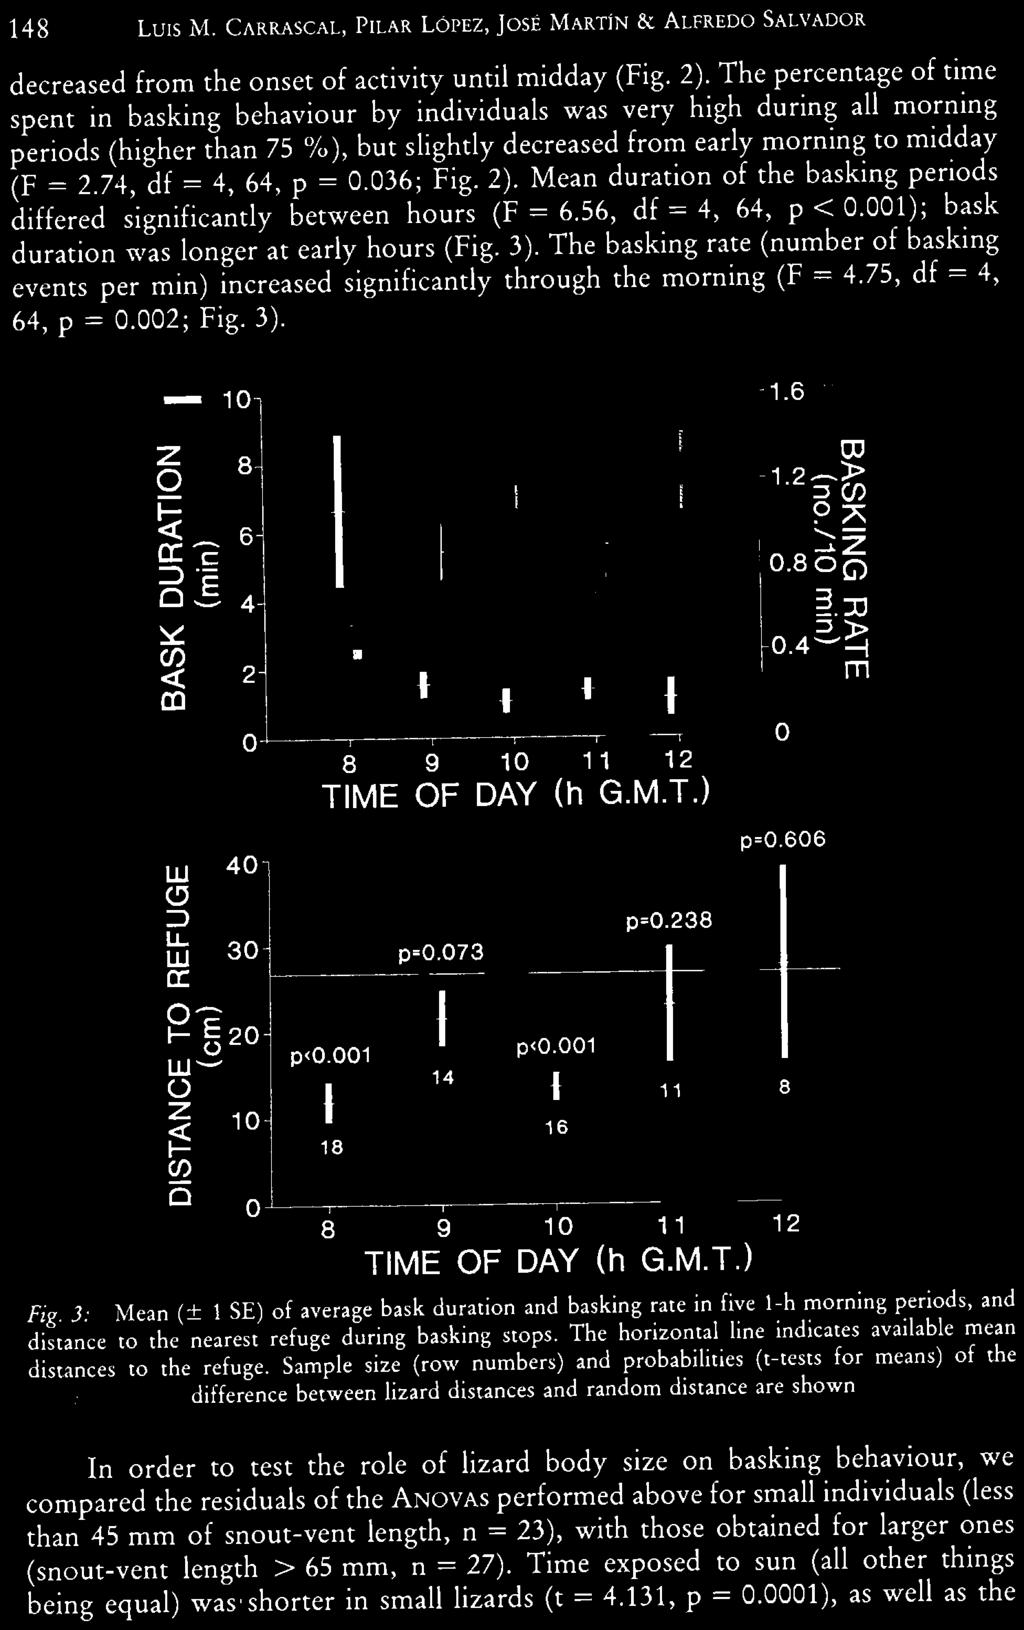 decreased from the onset of activity until midday (Fig. 2).